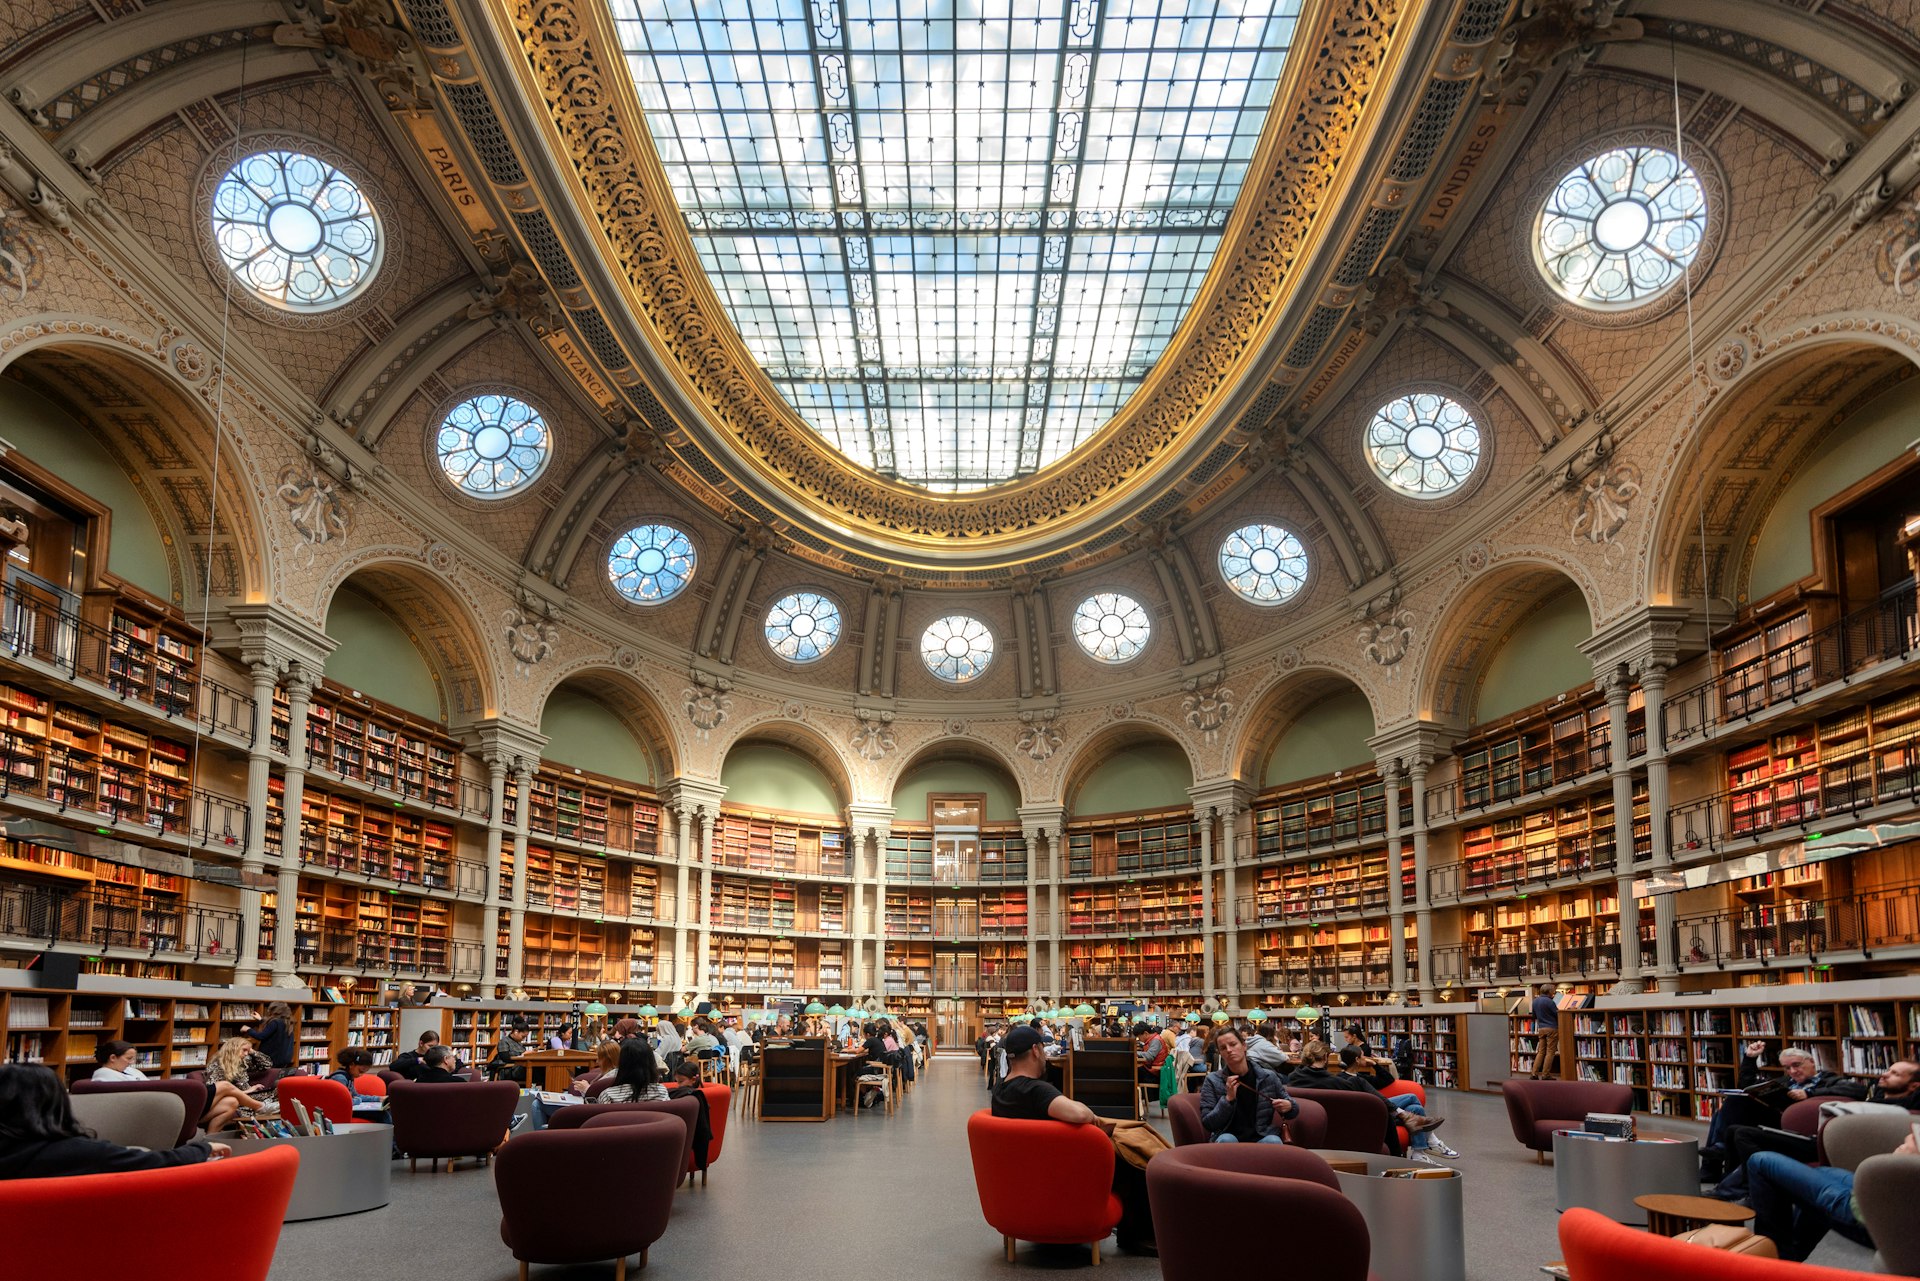 Many people are studying at long desks or lounging in colorful armchairs in a library. Many thousands of books are stored in shelves lining the walls and there is an enormous decorative oval skylight in the ceiling,